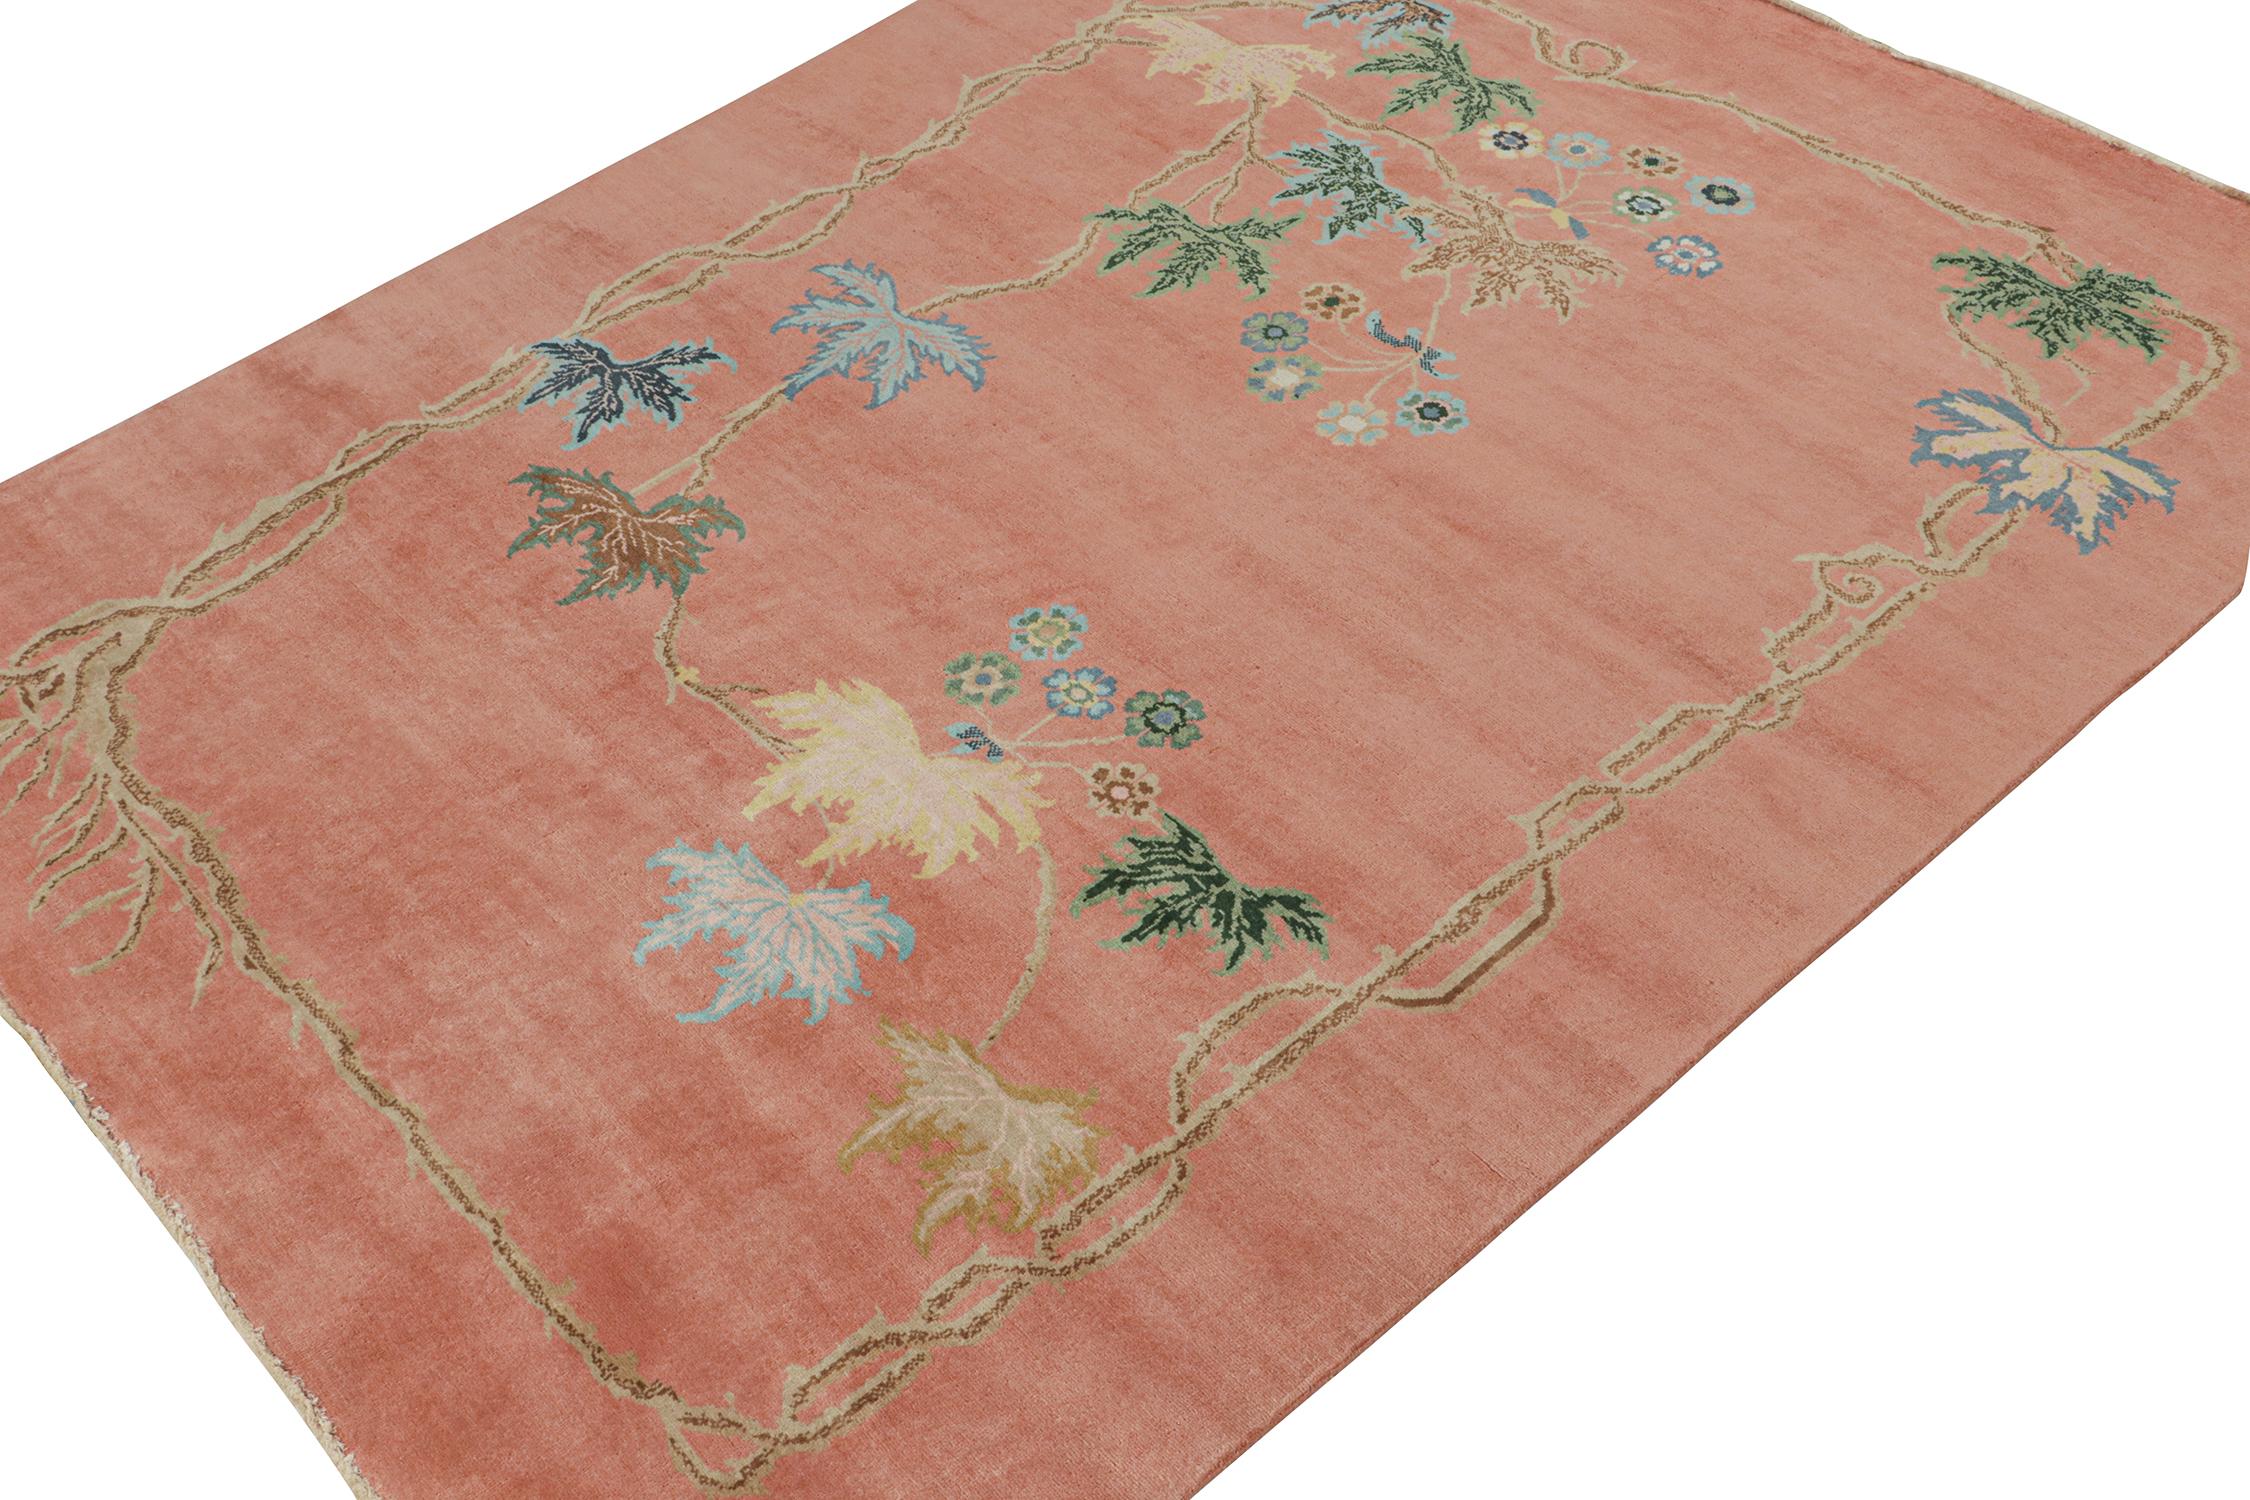 This 8x10 ode to Chinese Art Deco rugs is the next addition to Rug & Kilim's inspired new Deco Collection. 

Further On the Design:

The piece enjoys an emphasis on a warm pink background with finely detailed floral patterns within. Connoisseurs may